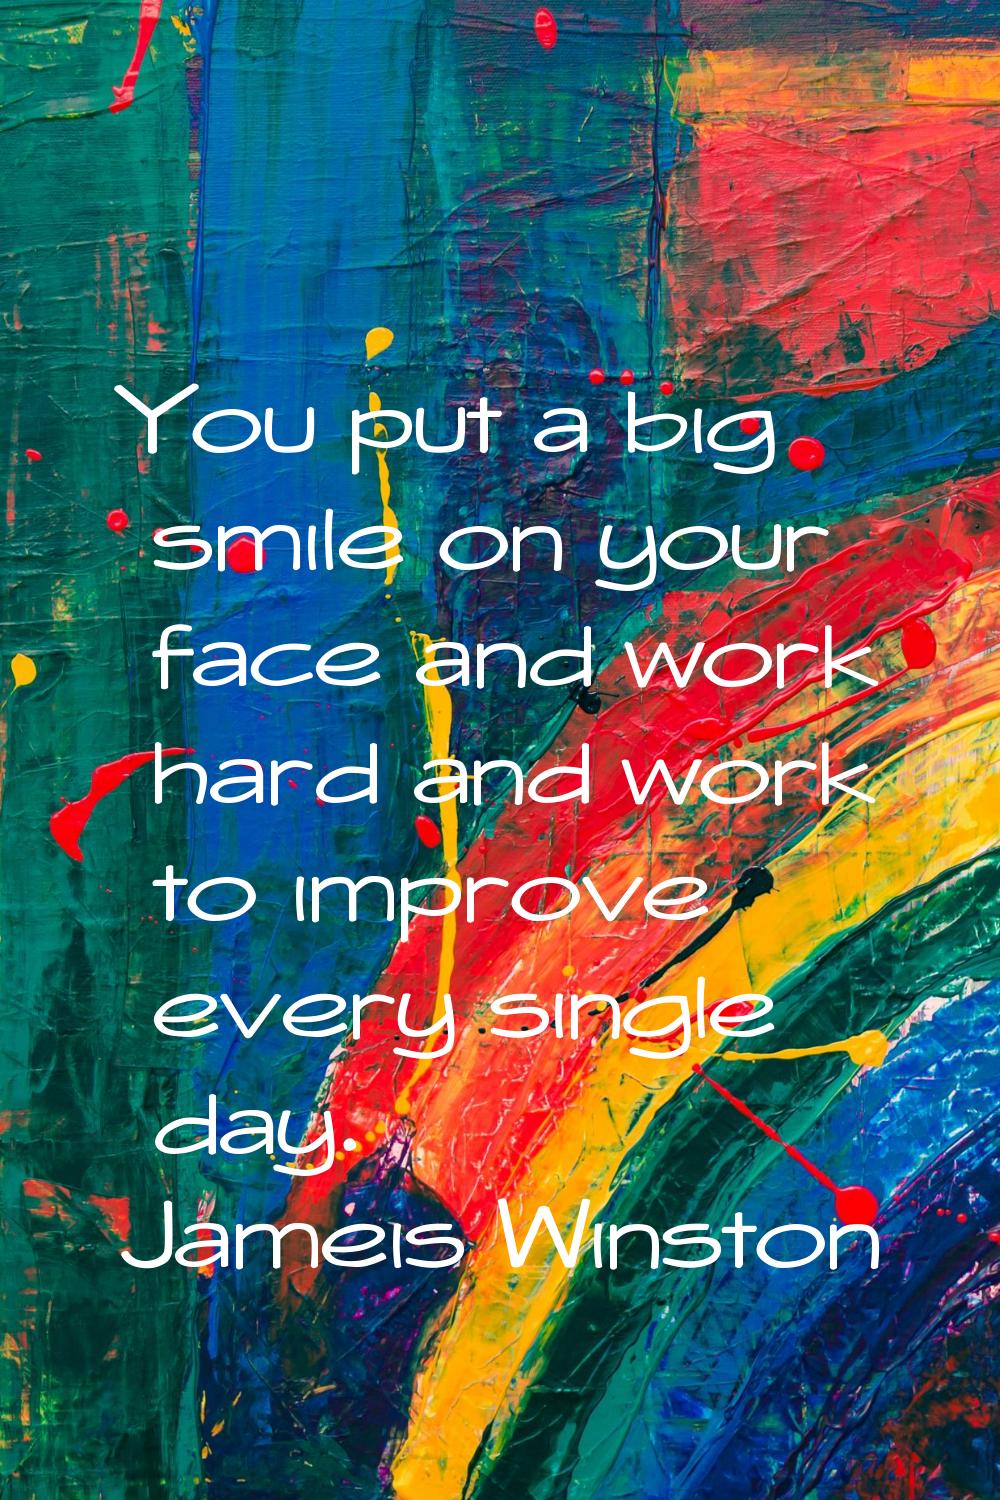 You put a big smile on your face and work hard and work to improve every single day.